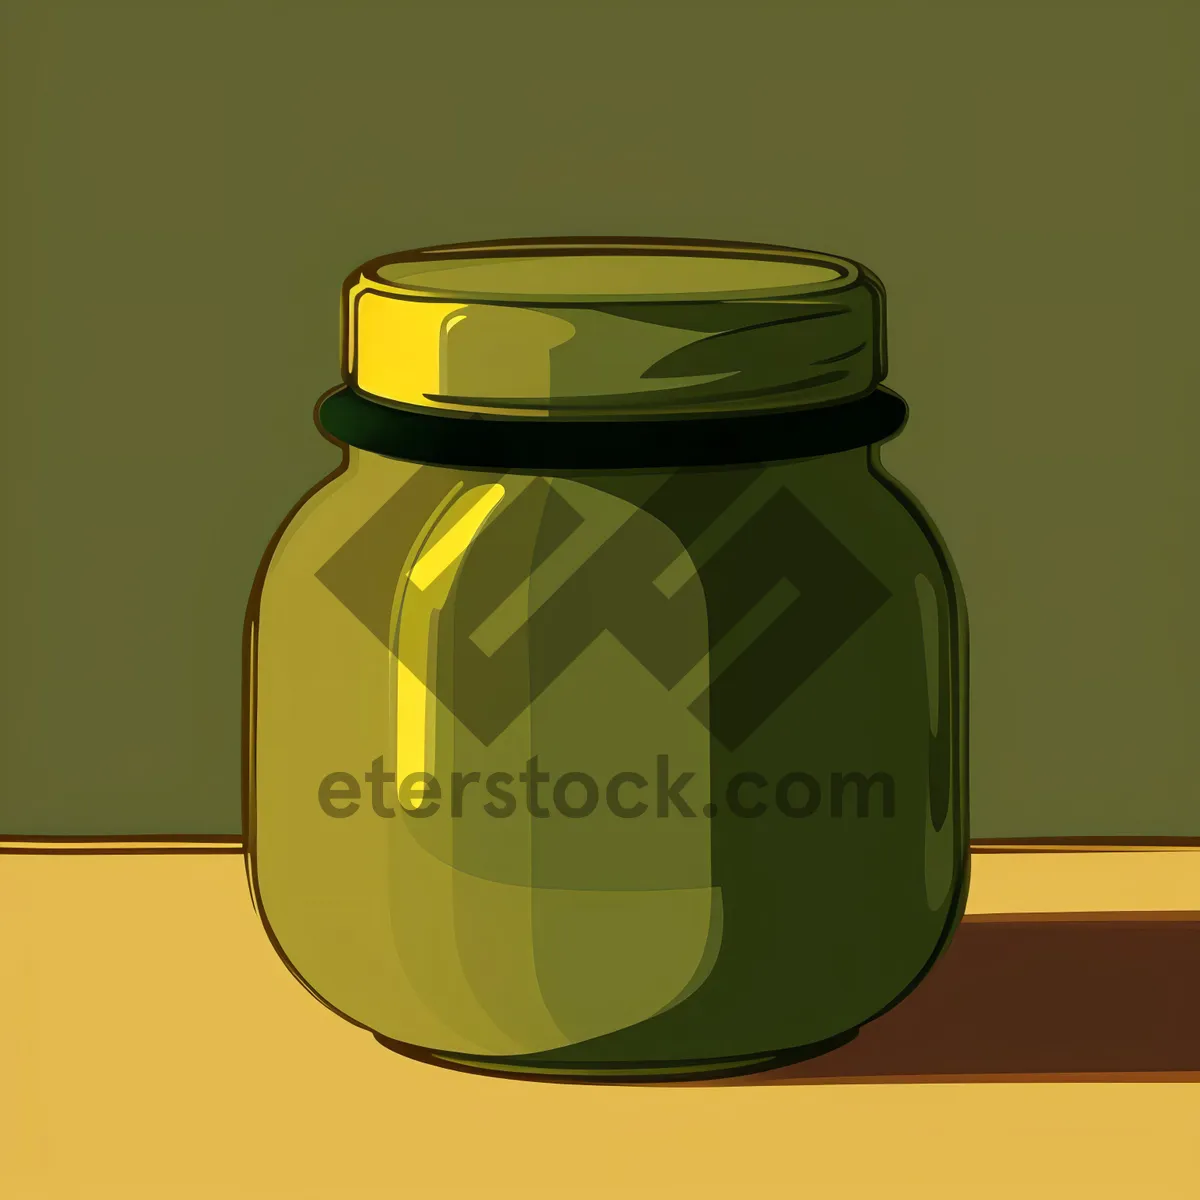 Picture of Glass Bottle with Conserve Drink in Container